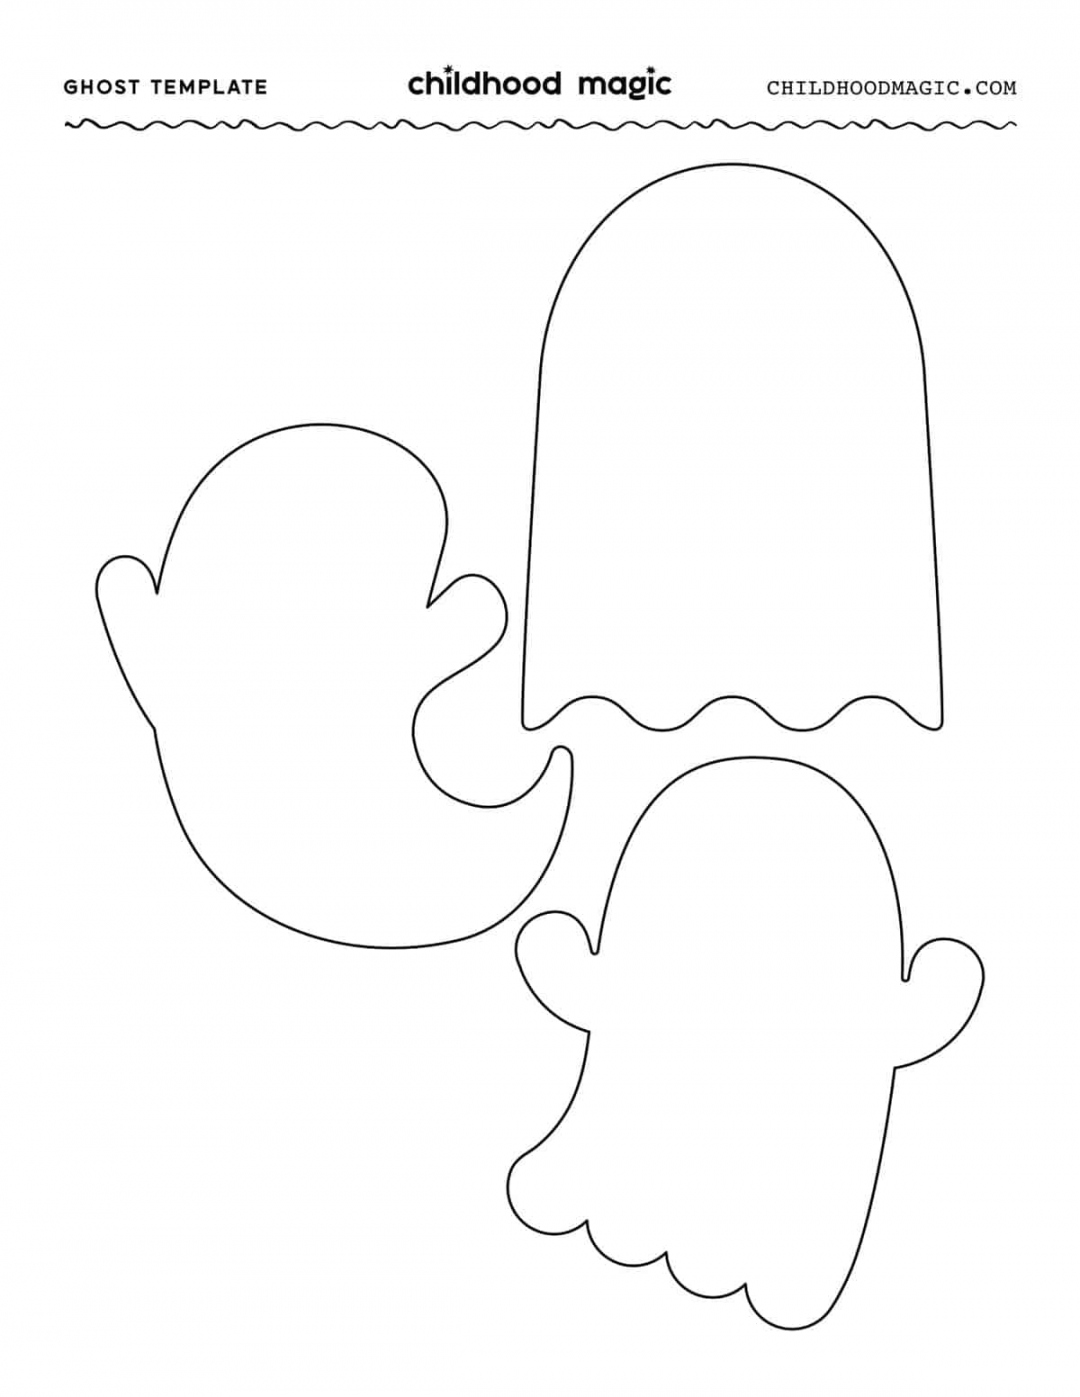 Ghost Template - Free Printable - Childhood Magic - FREE Printables - Ghost Shape